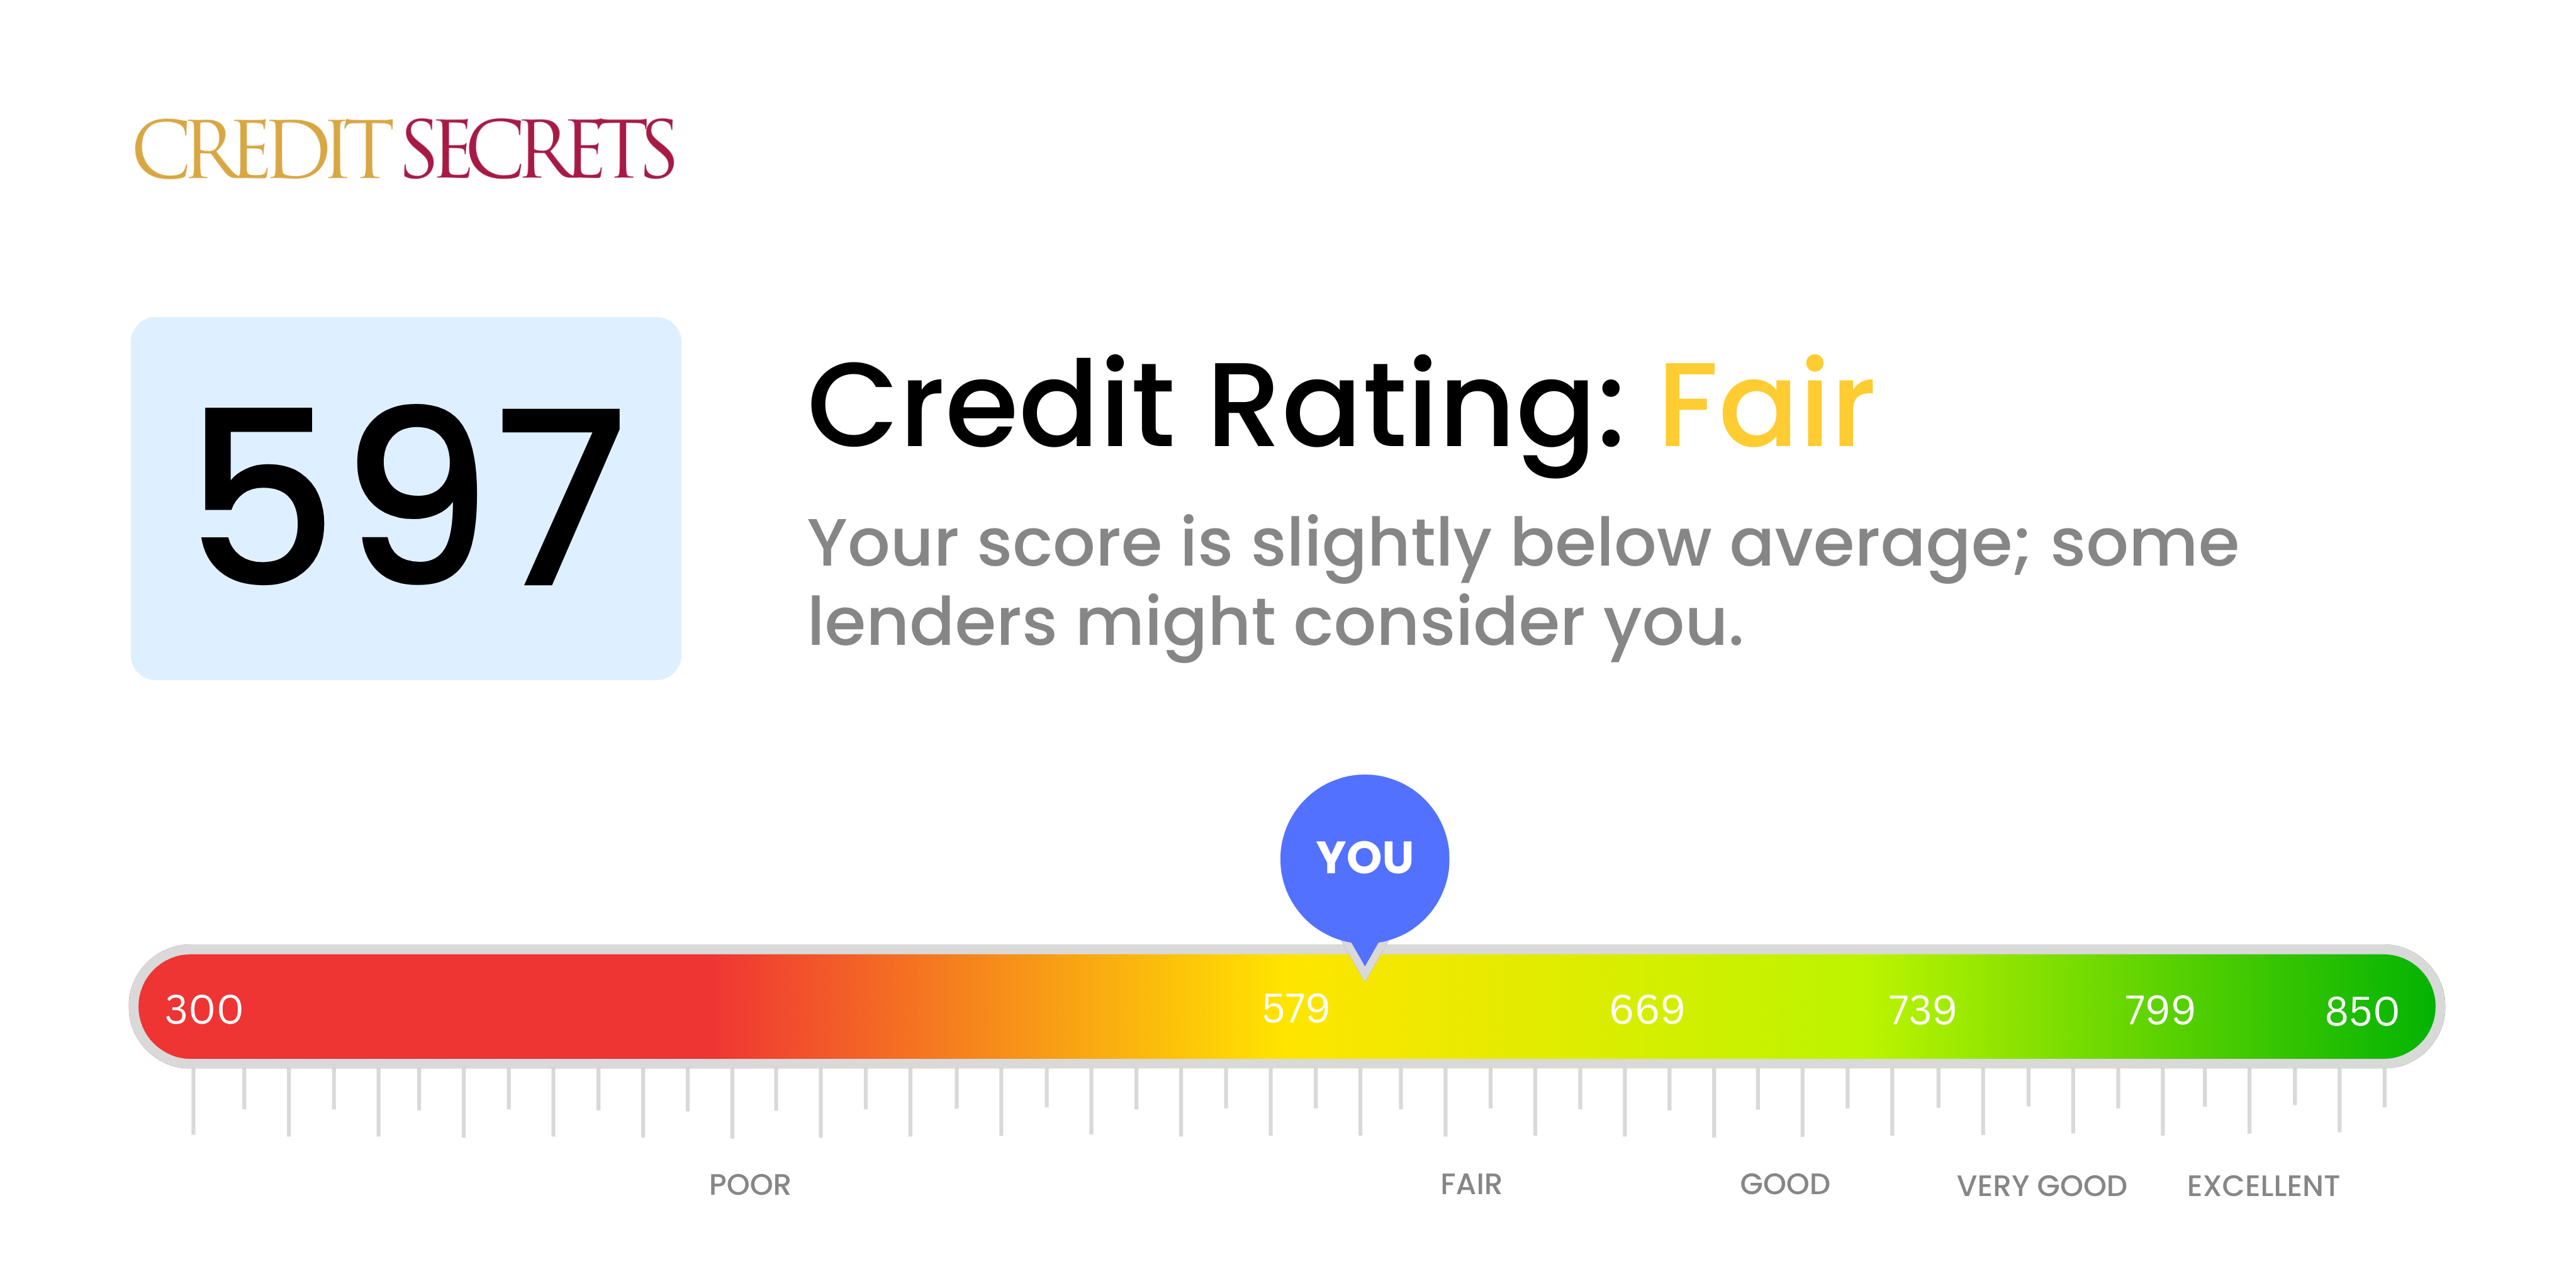 Is 597 a good credit score?